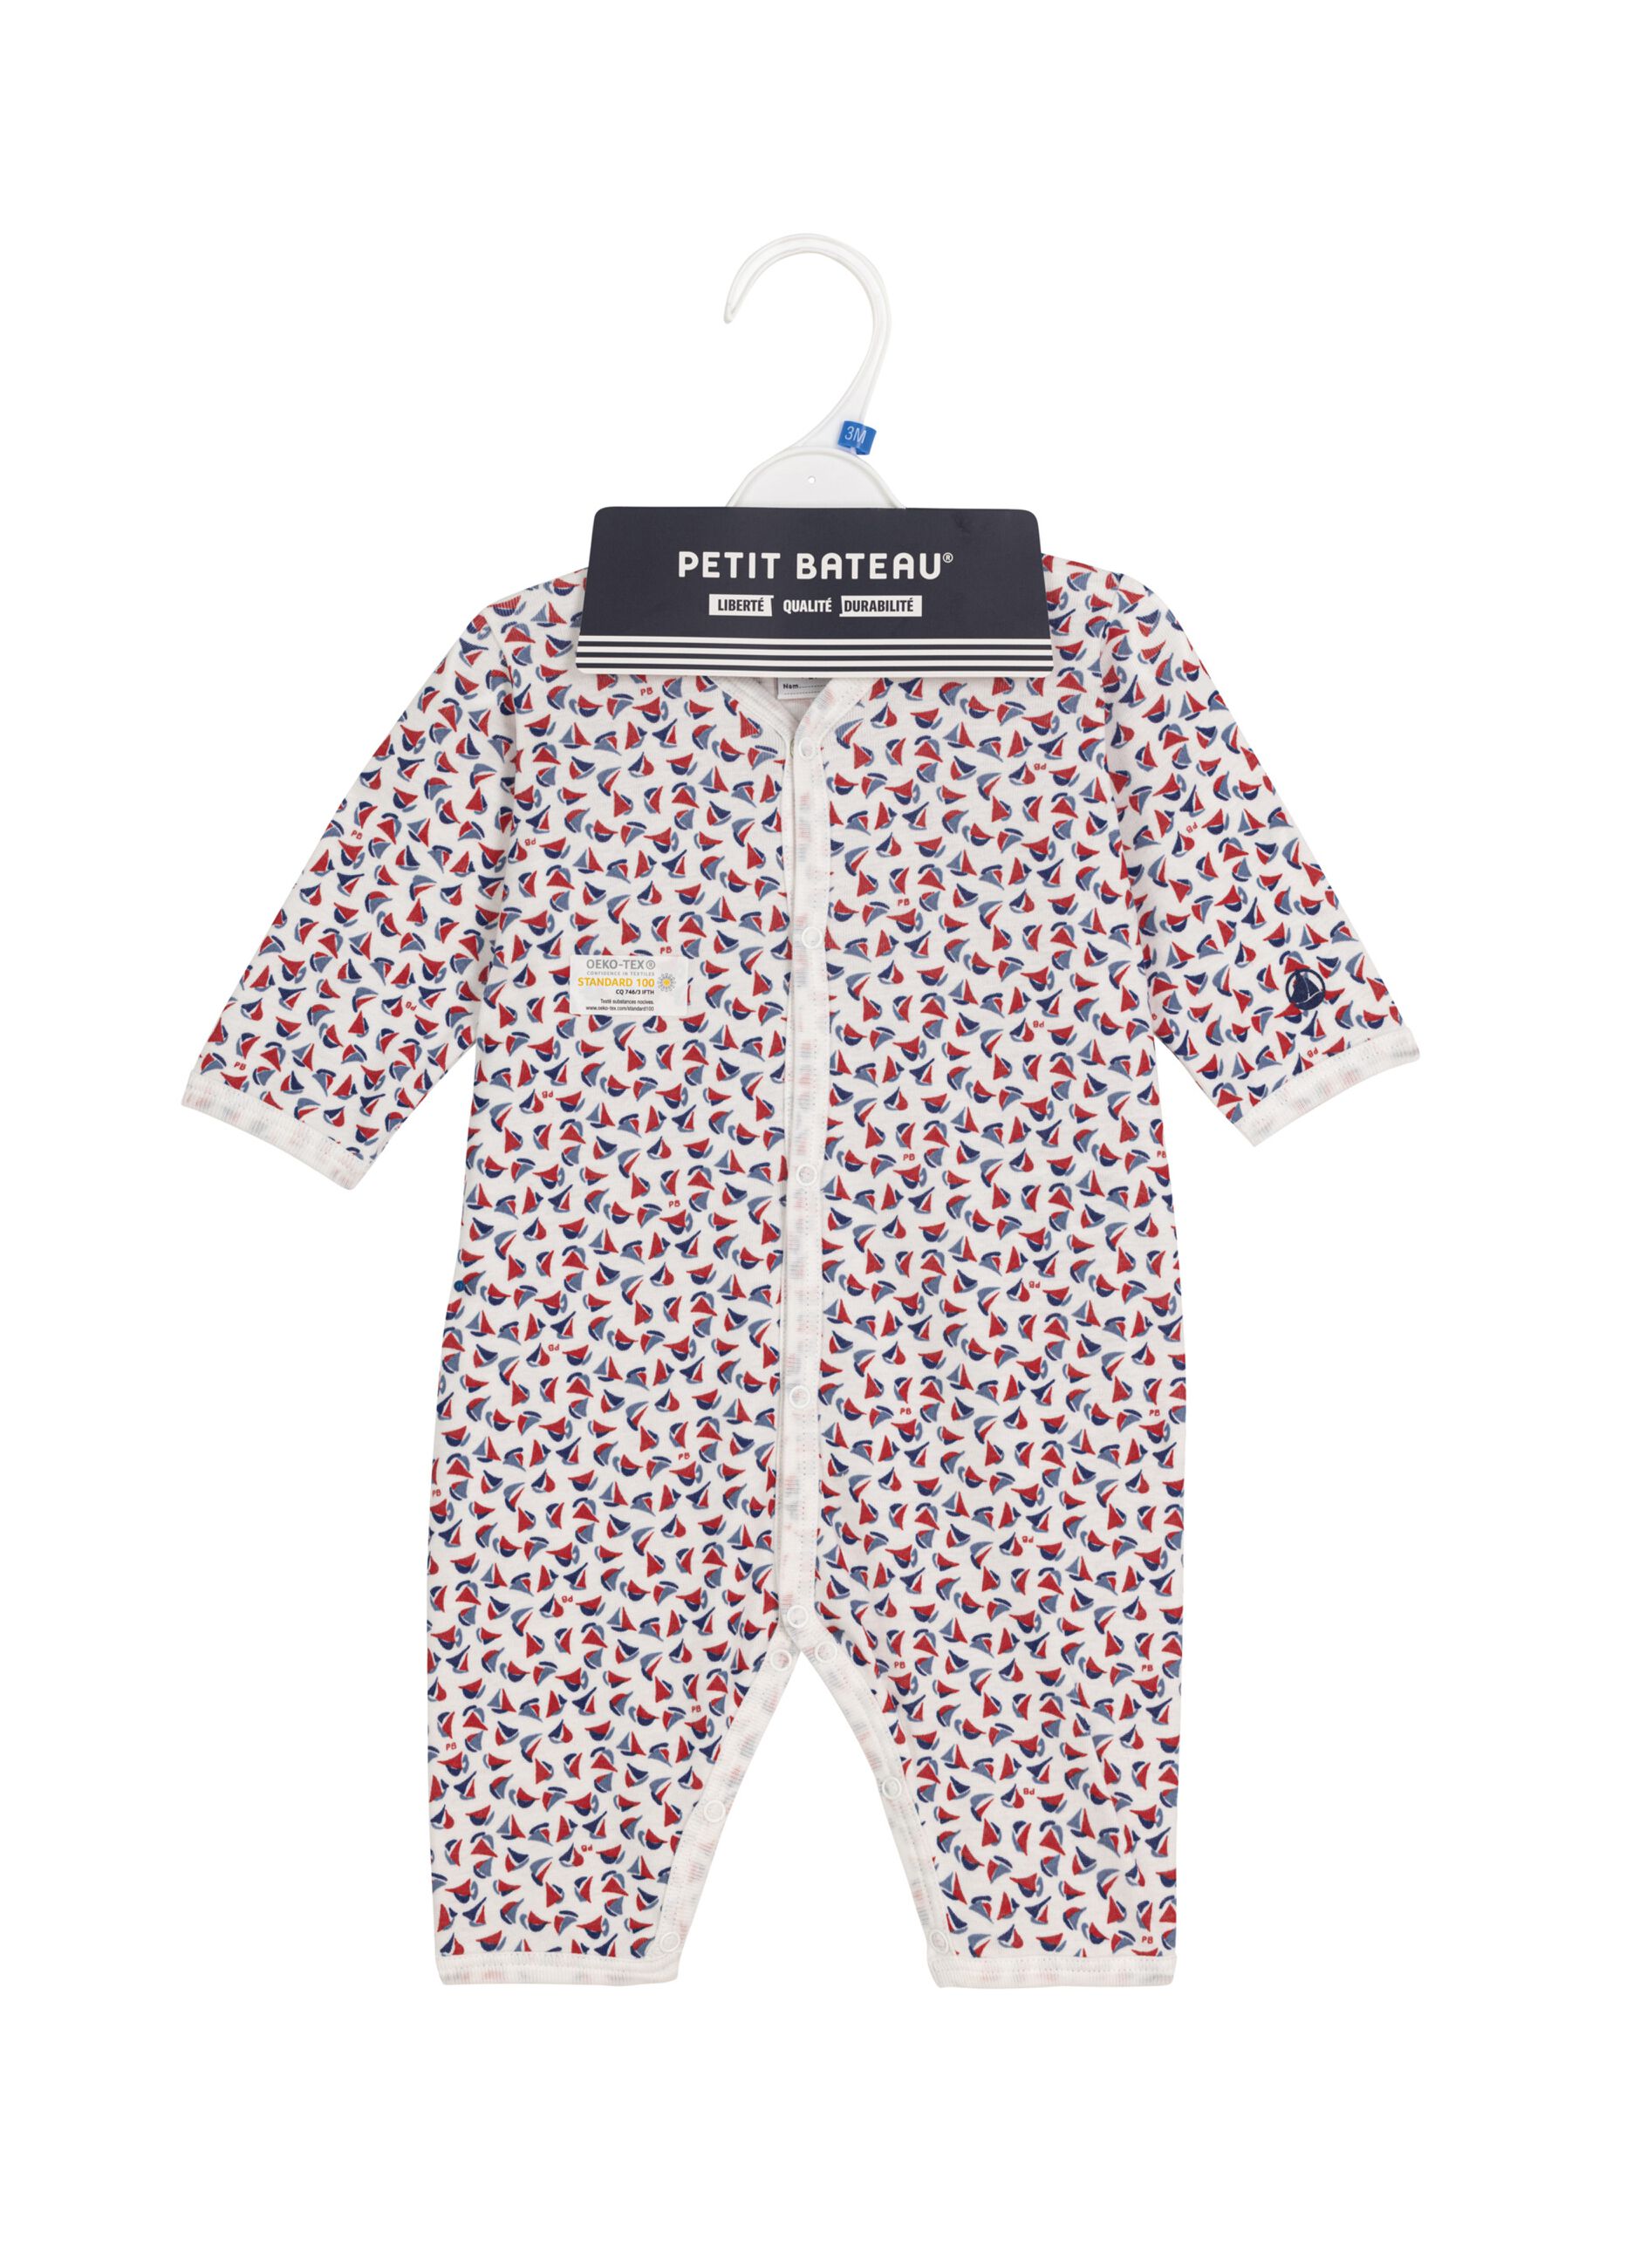 Onesie with sail boats